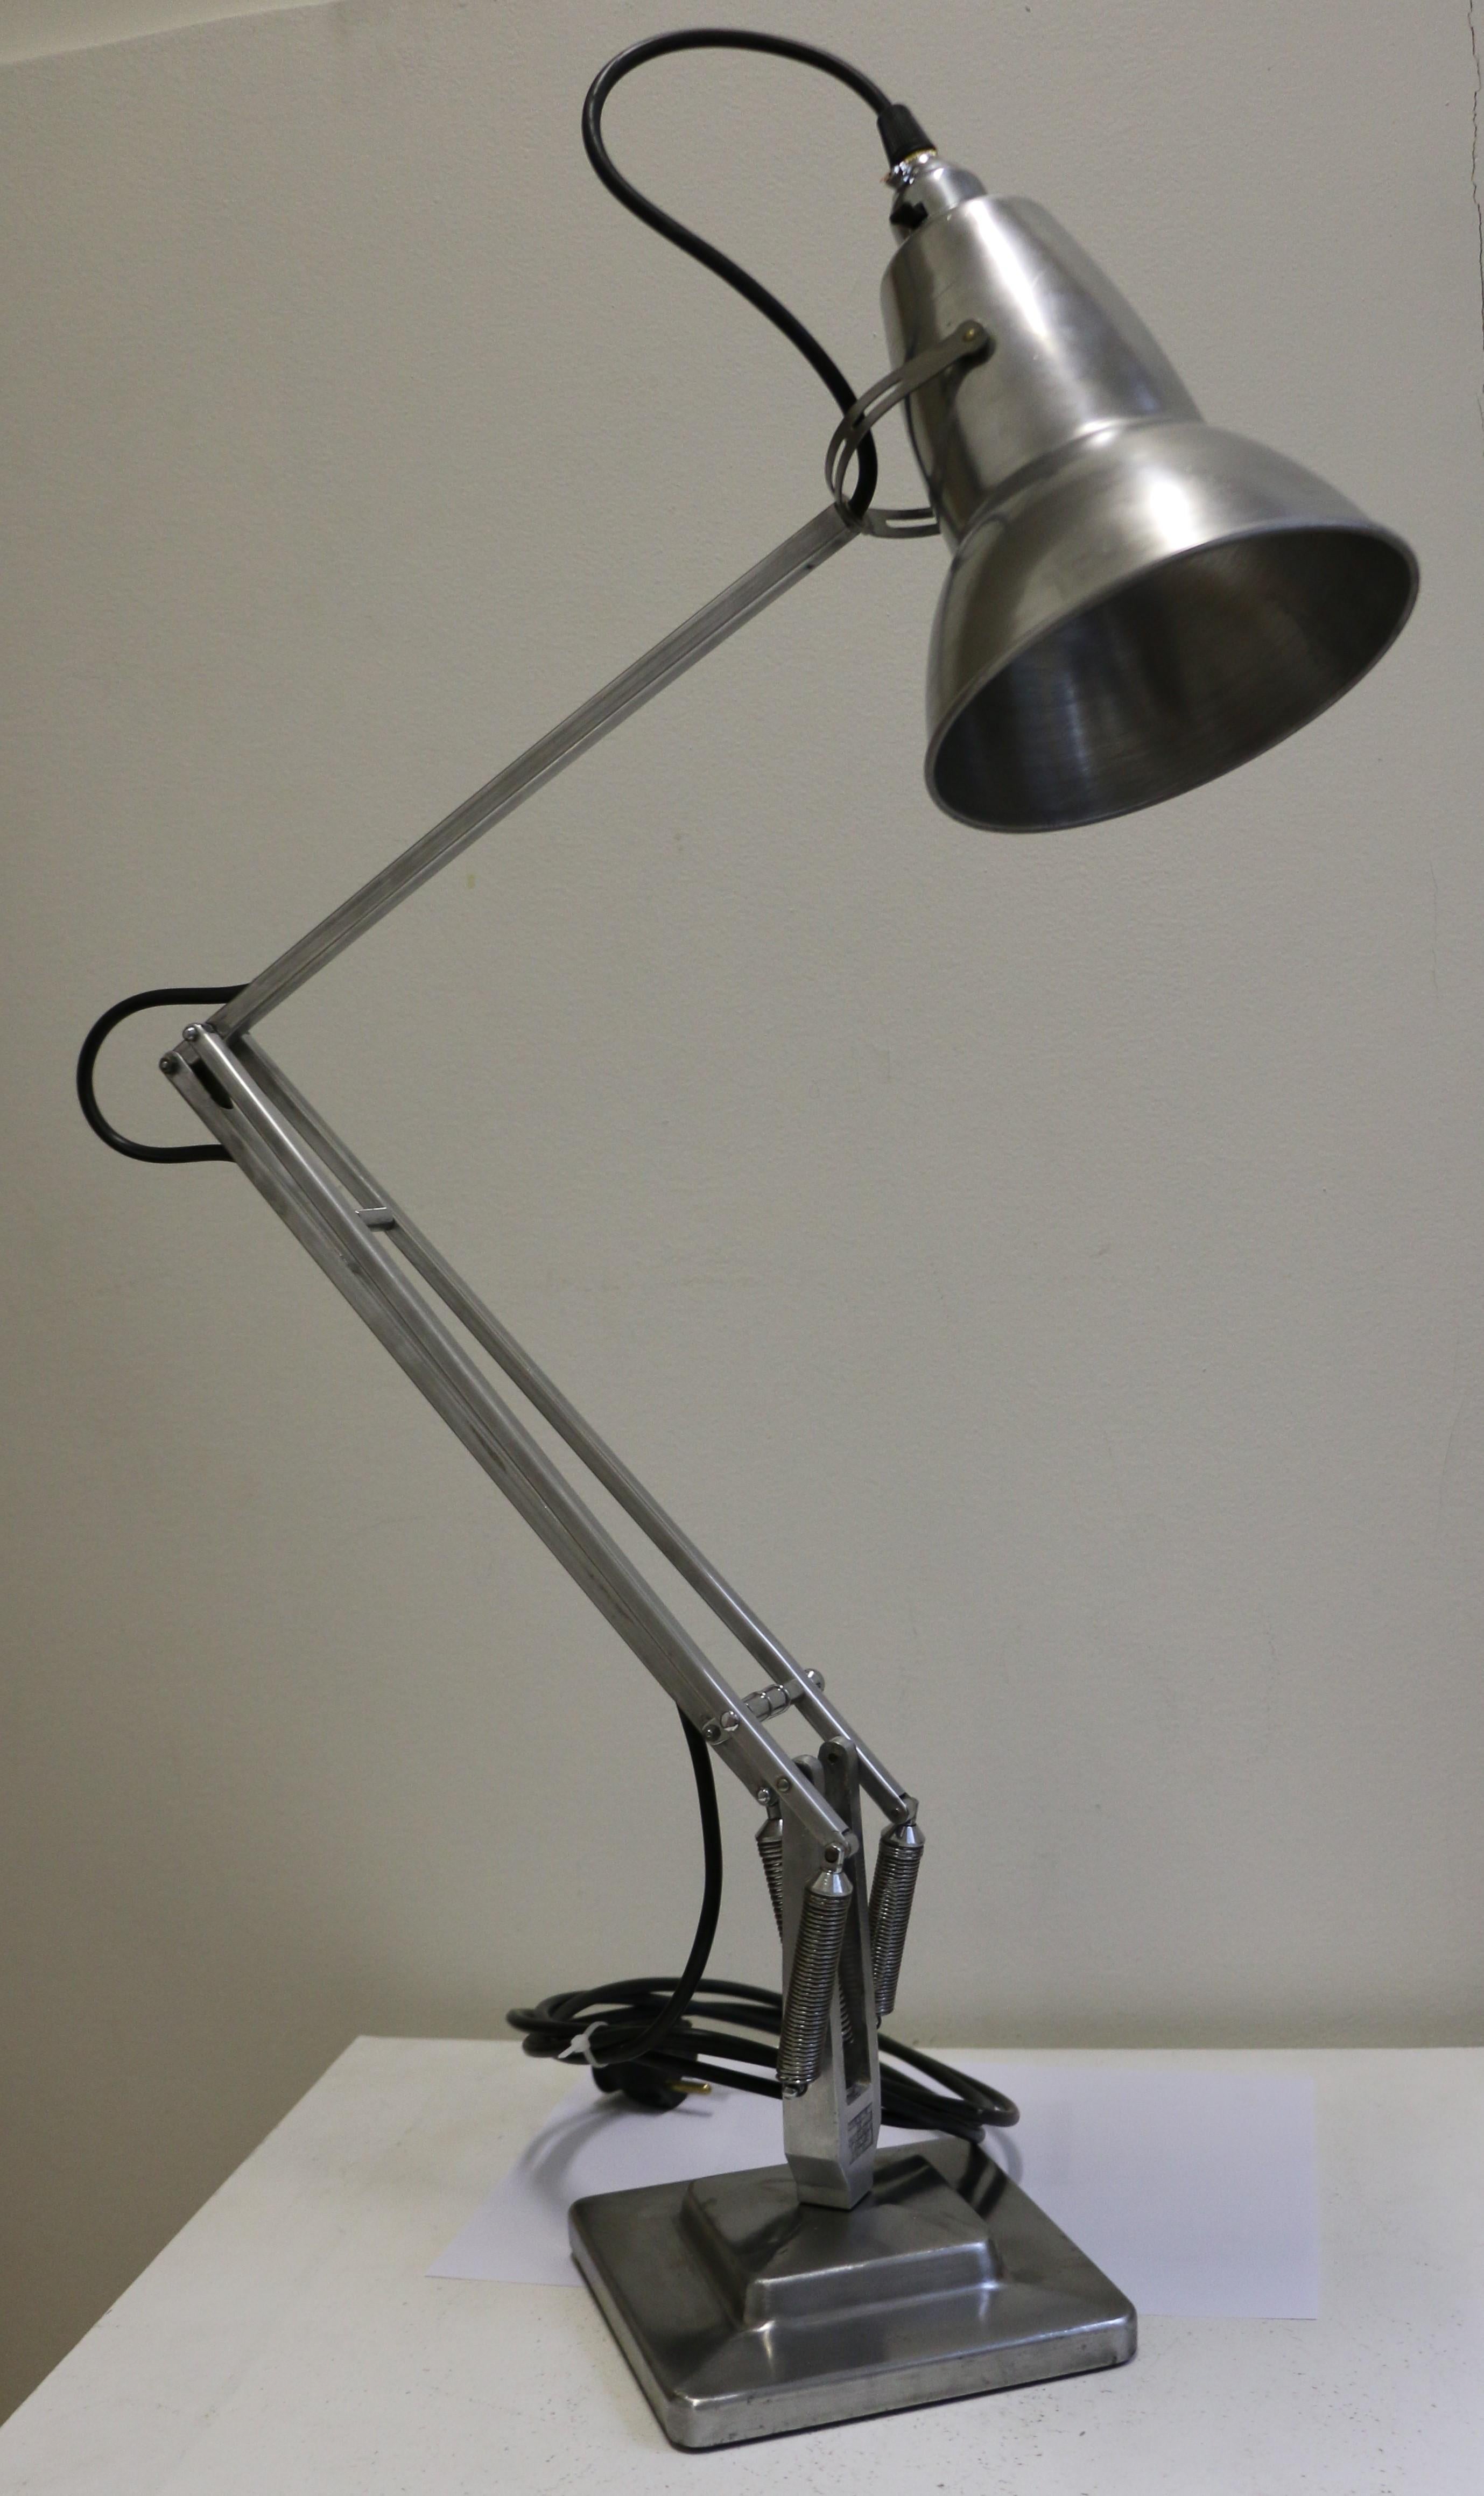 An Anglepoise desk lamp by Herbert Terry, designed by George Cawardine in the 1930s in the UK. This piece dates from the 1950s and is presented in an industrial style i.e. with polished metal. Wiring has been renewed as is the chrome bulb holder